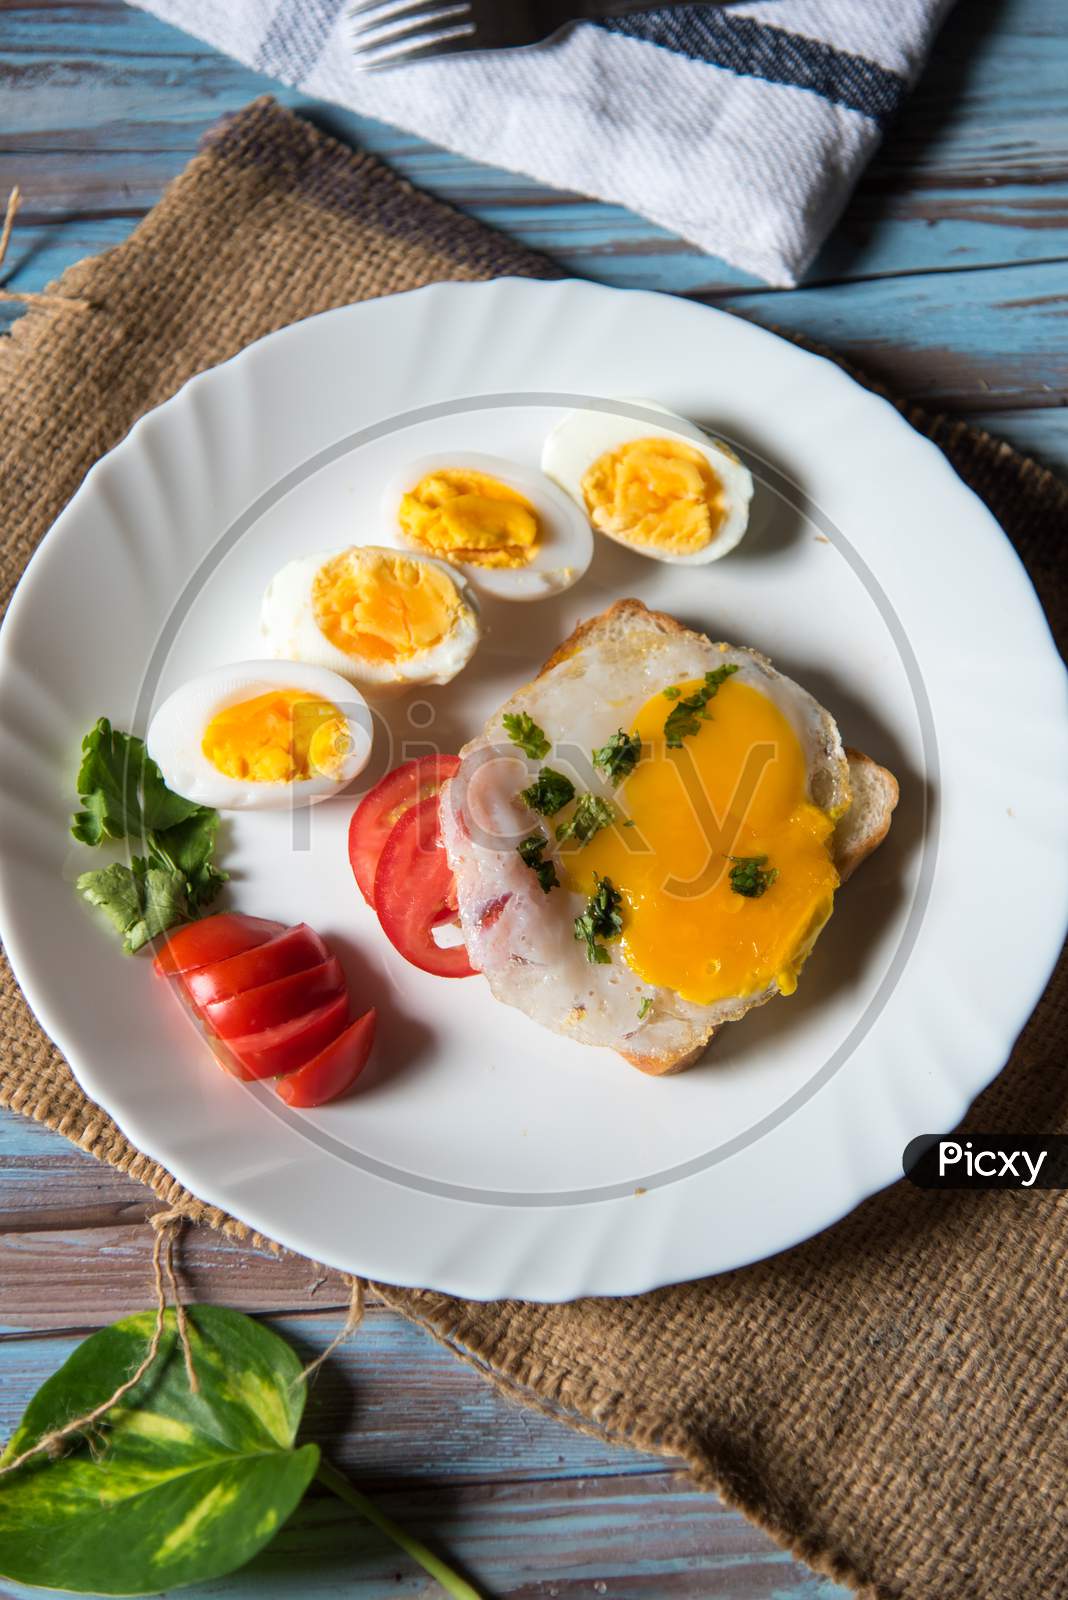 Vertical view of bread slice with poached egg and slices of boiled eggs